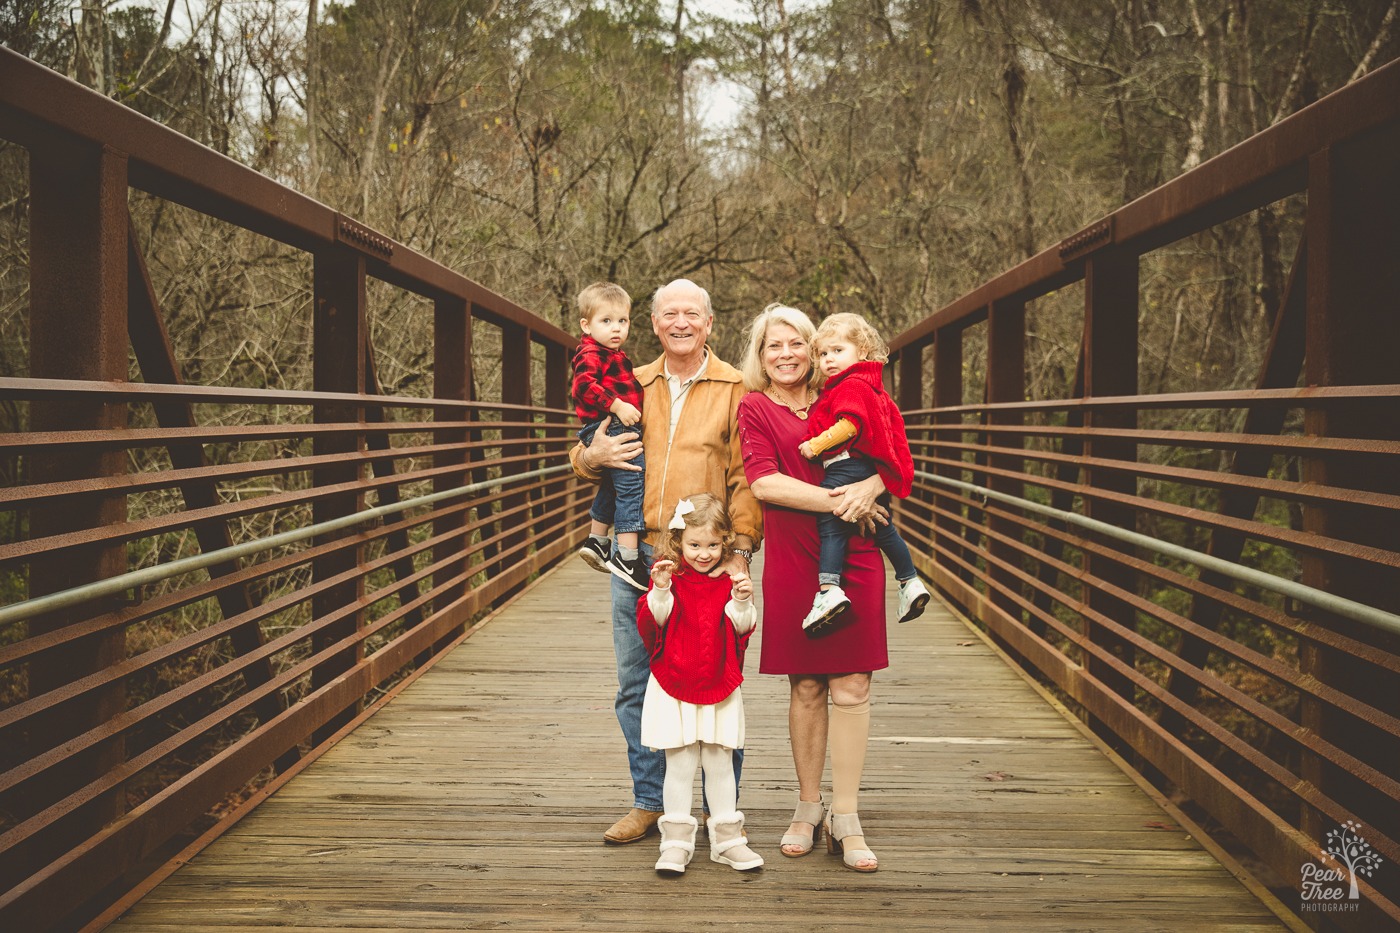 Grandparents holding their grandchildren and smiling on the Olde Rope Mill bridge in the fall